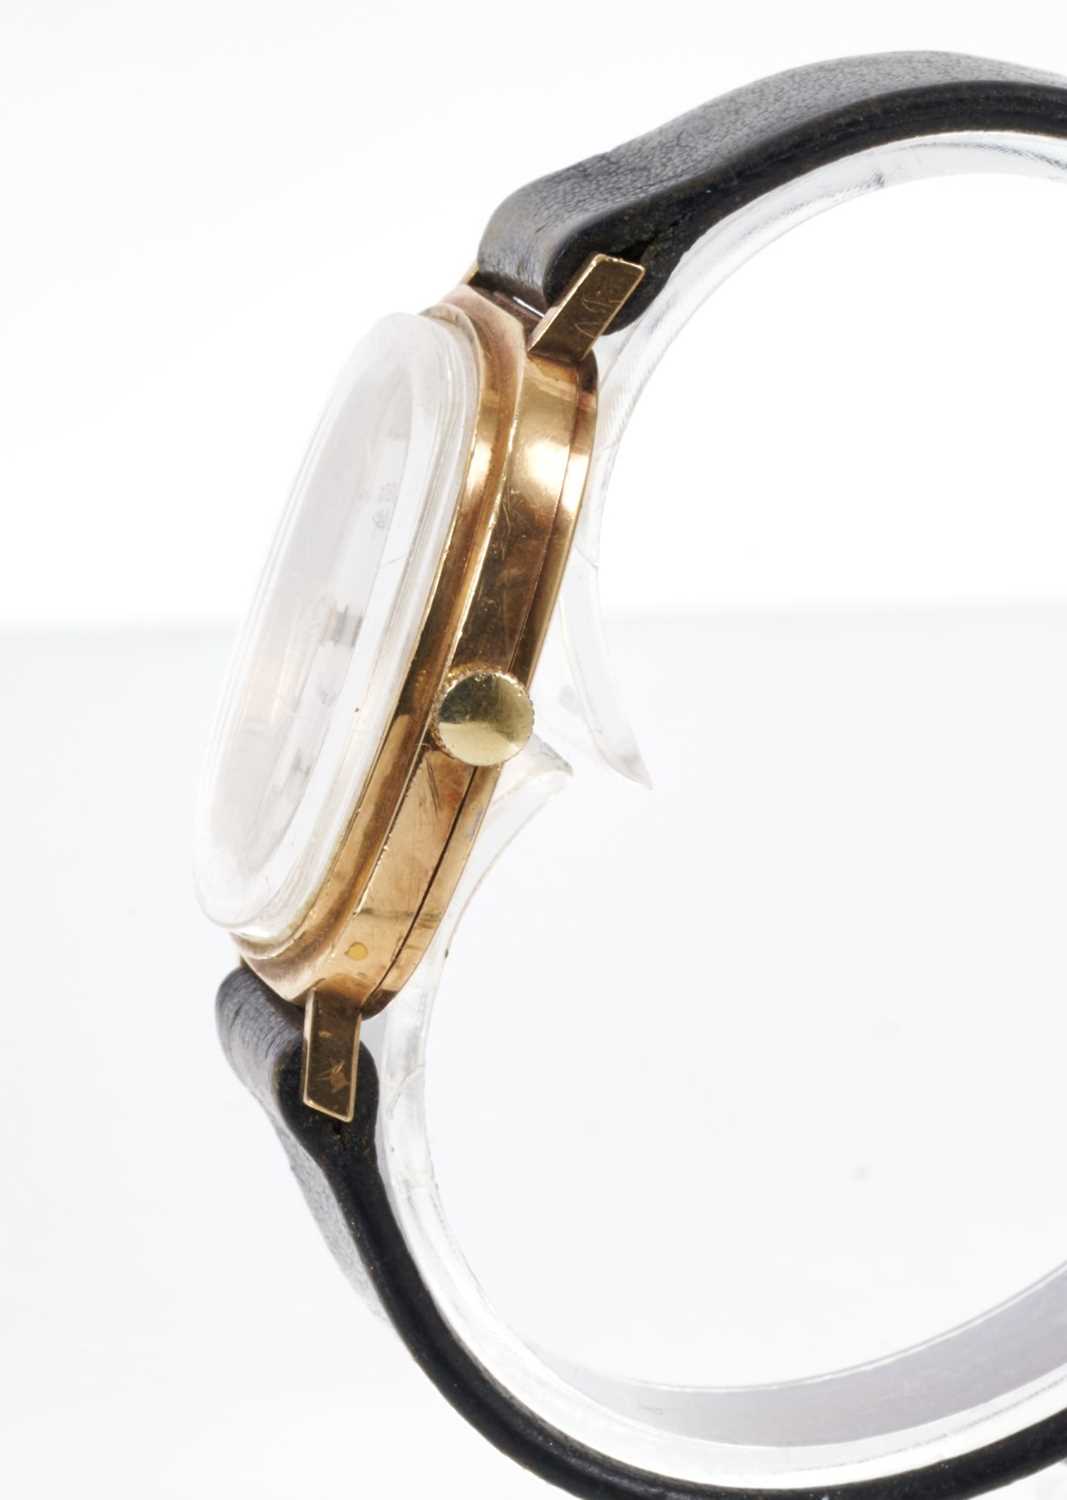 Gentlemen's 1970s Rotary 9ct gold wristwatch with 17 jewel movement - Image 3 of 4